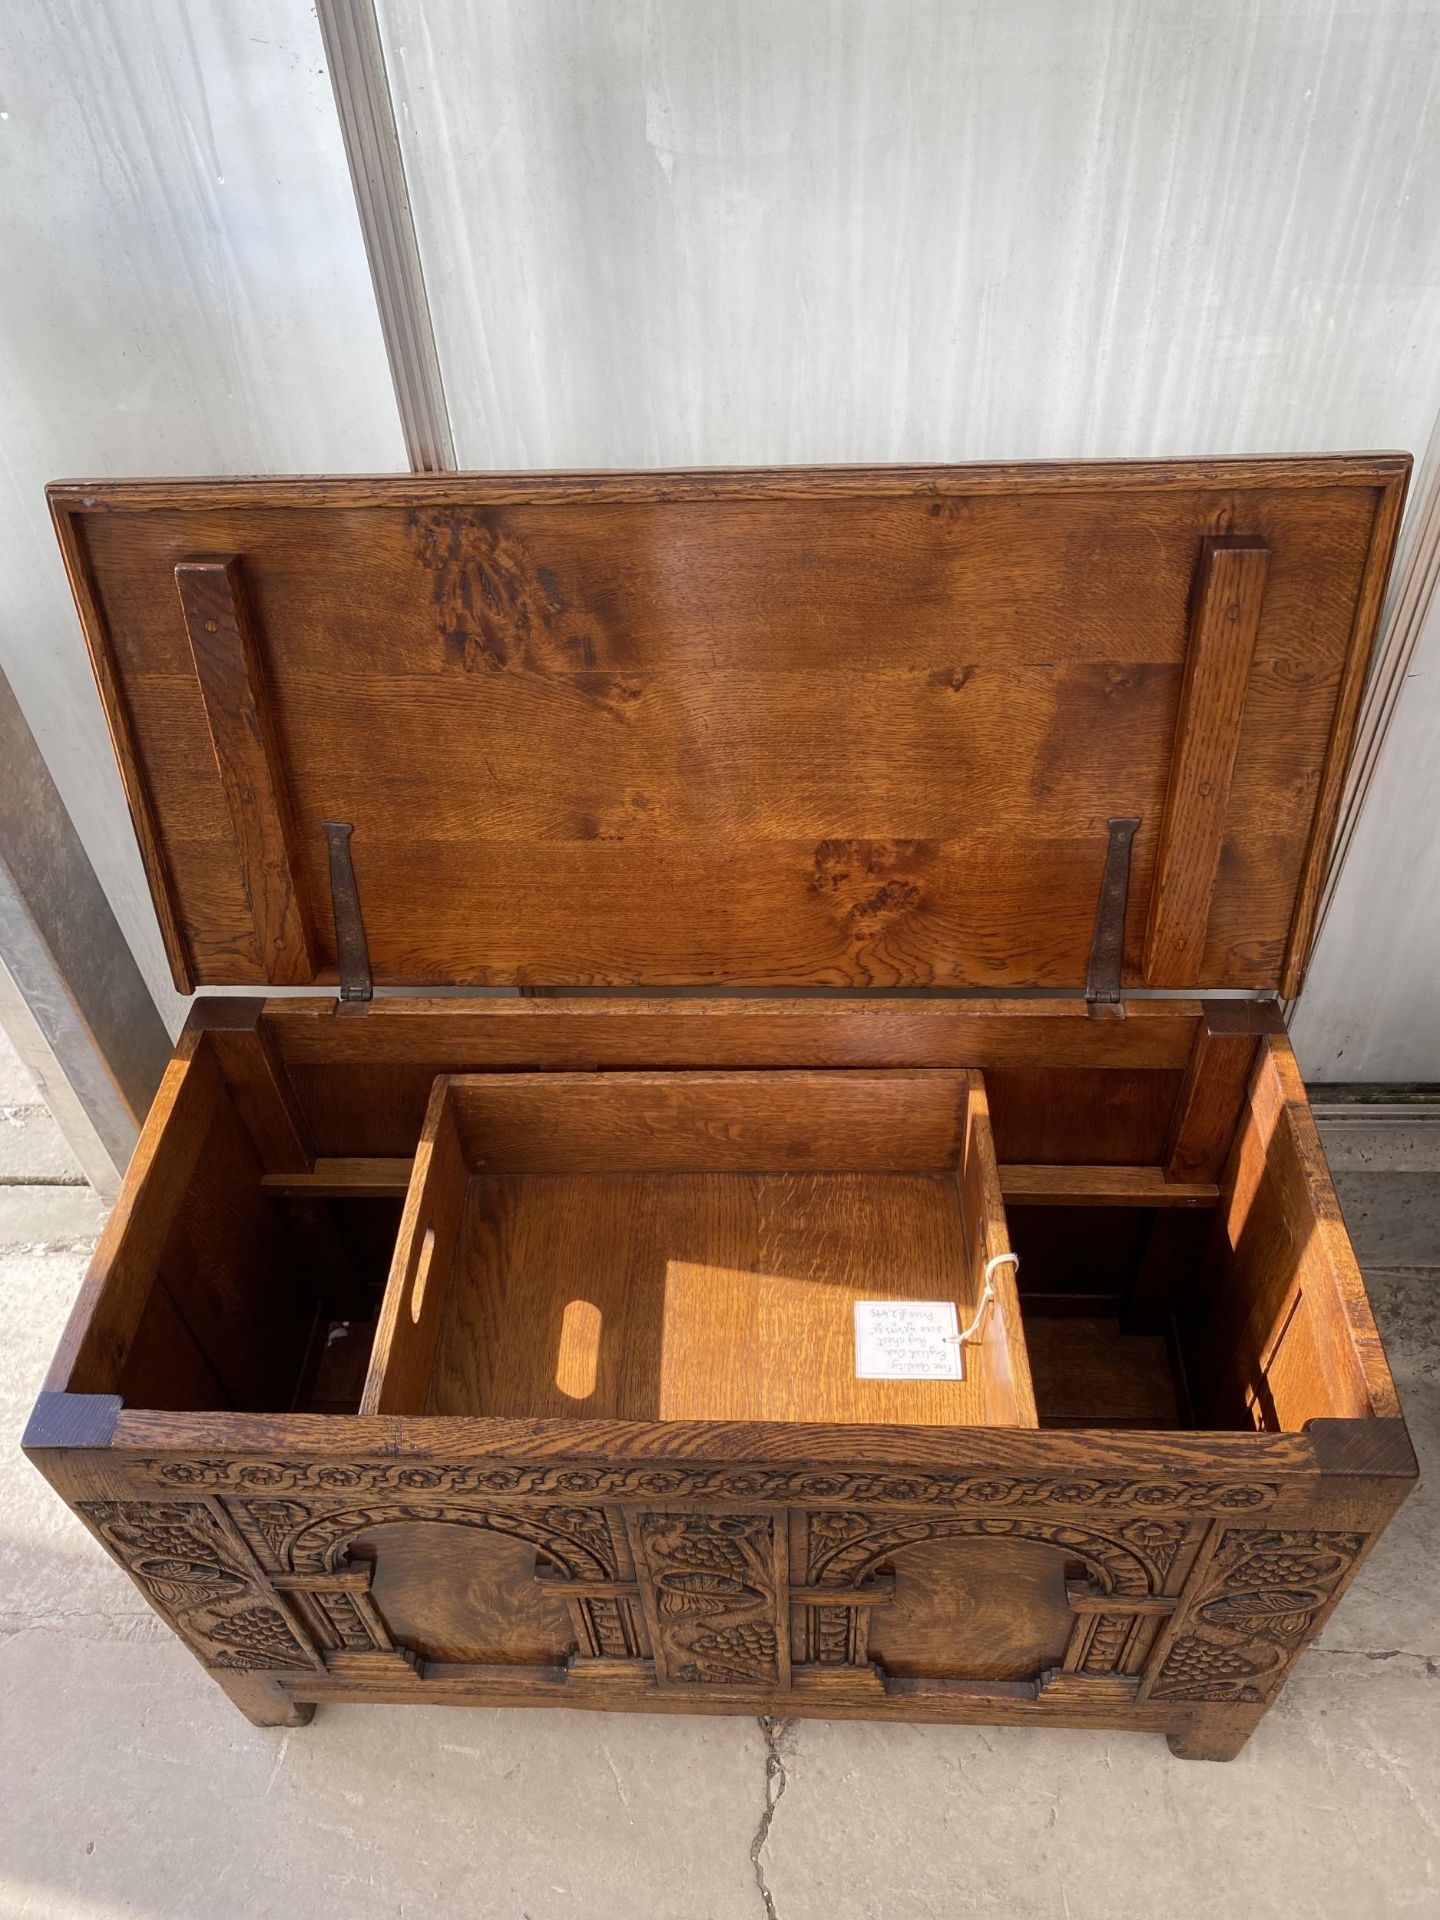 AN 18TH CENTURY STYLE OAK RUG/BLANKET CHEST WITH CARVED FRONT PANELS AND DROP-IN SLIDING TRAY, 42" - Image 4 of 10